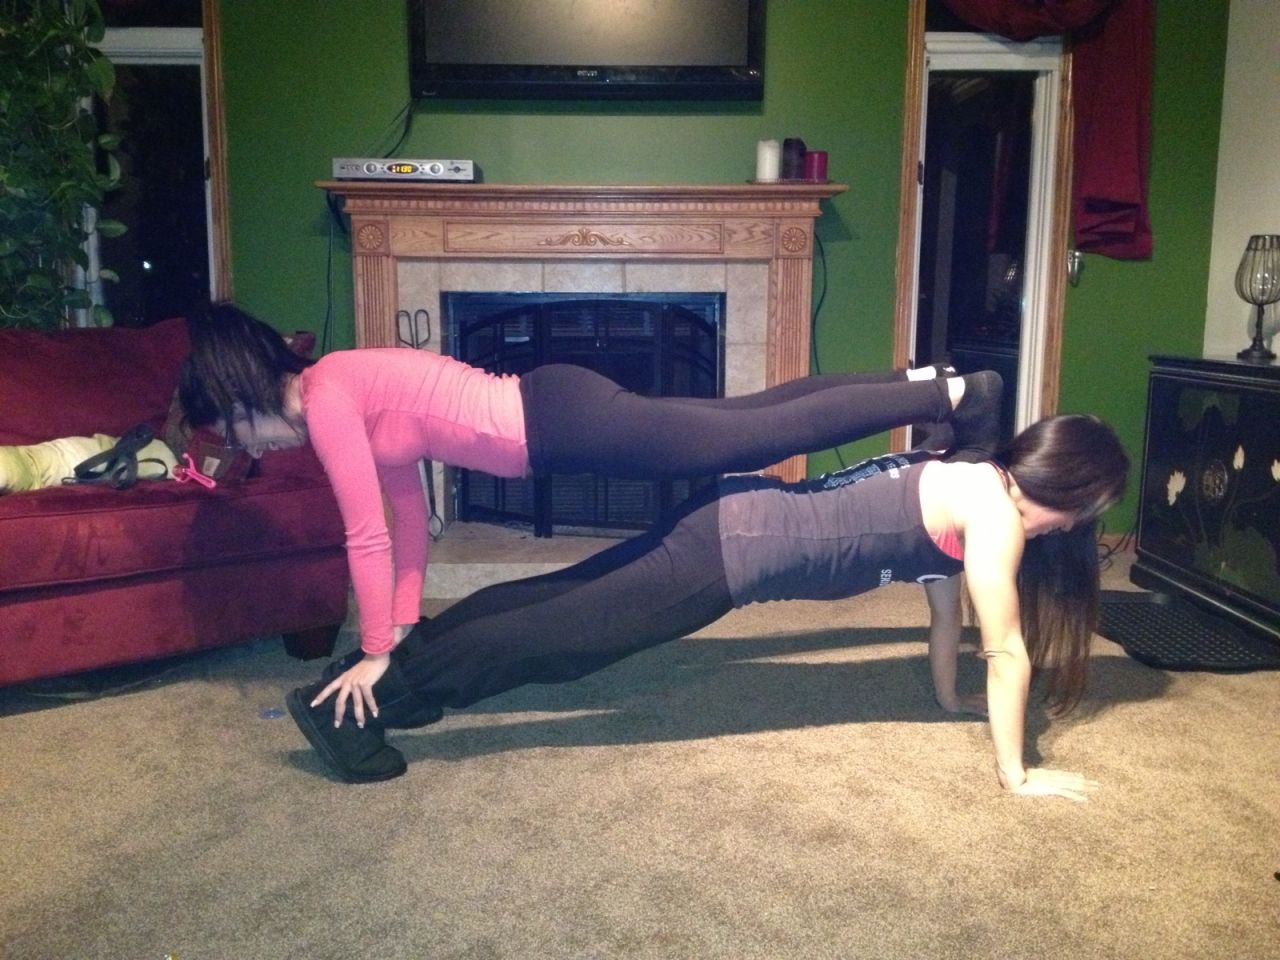 Garcia and her sister Savannah Rae Garcia motivate each other daily, Garcia says. Here they do a double plank together.